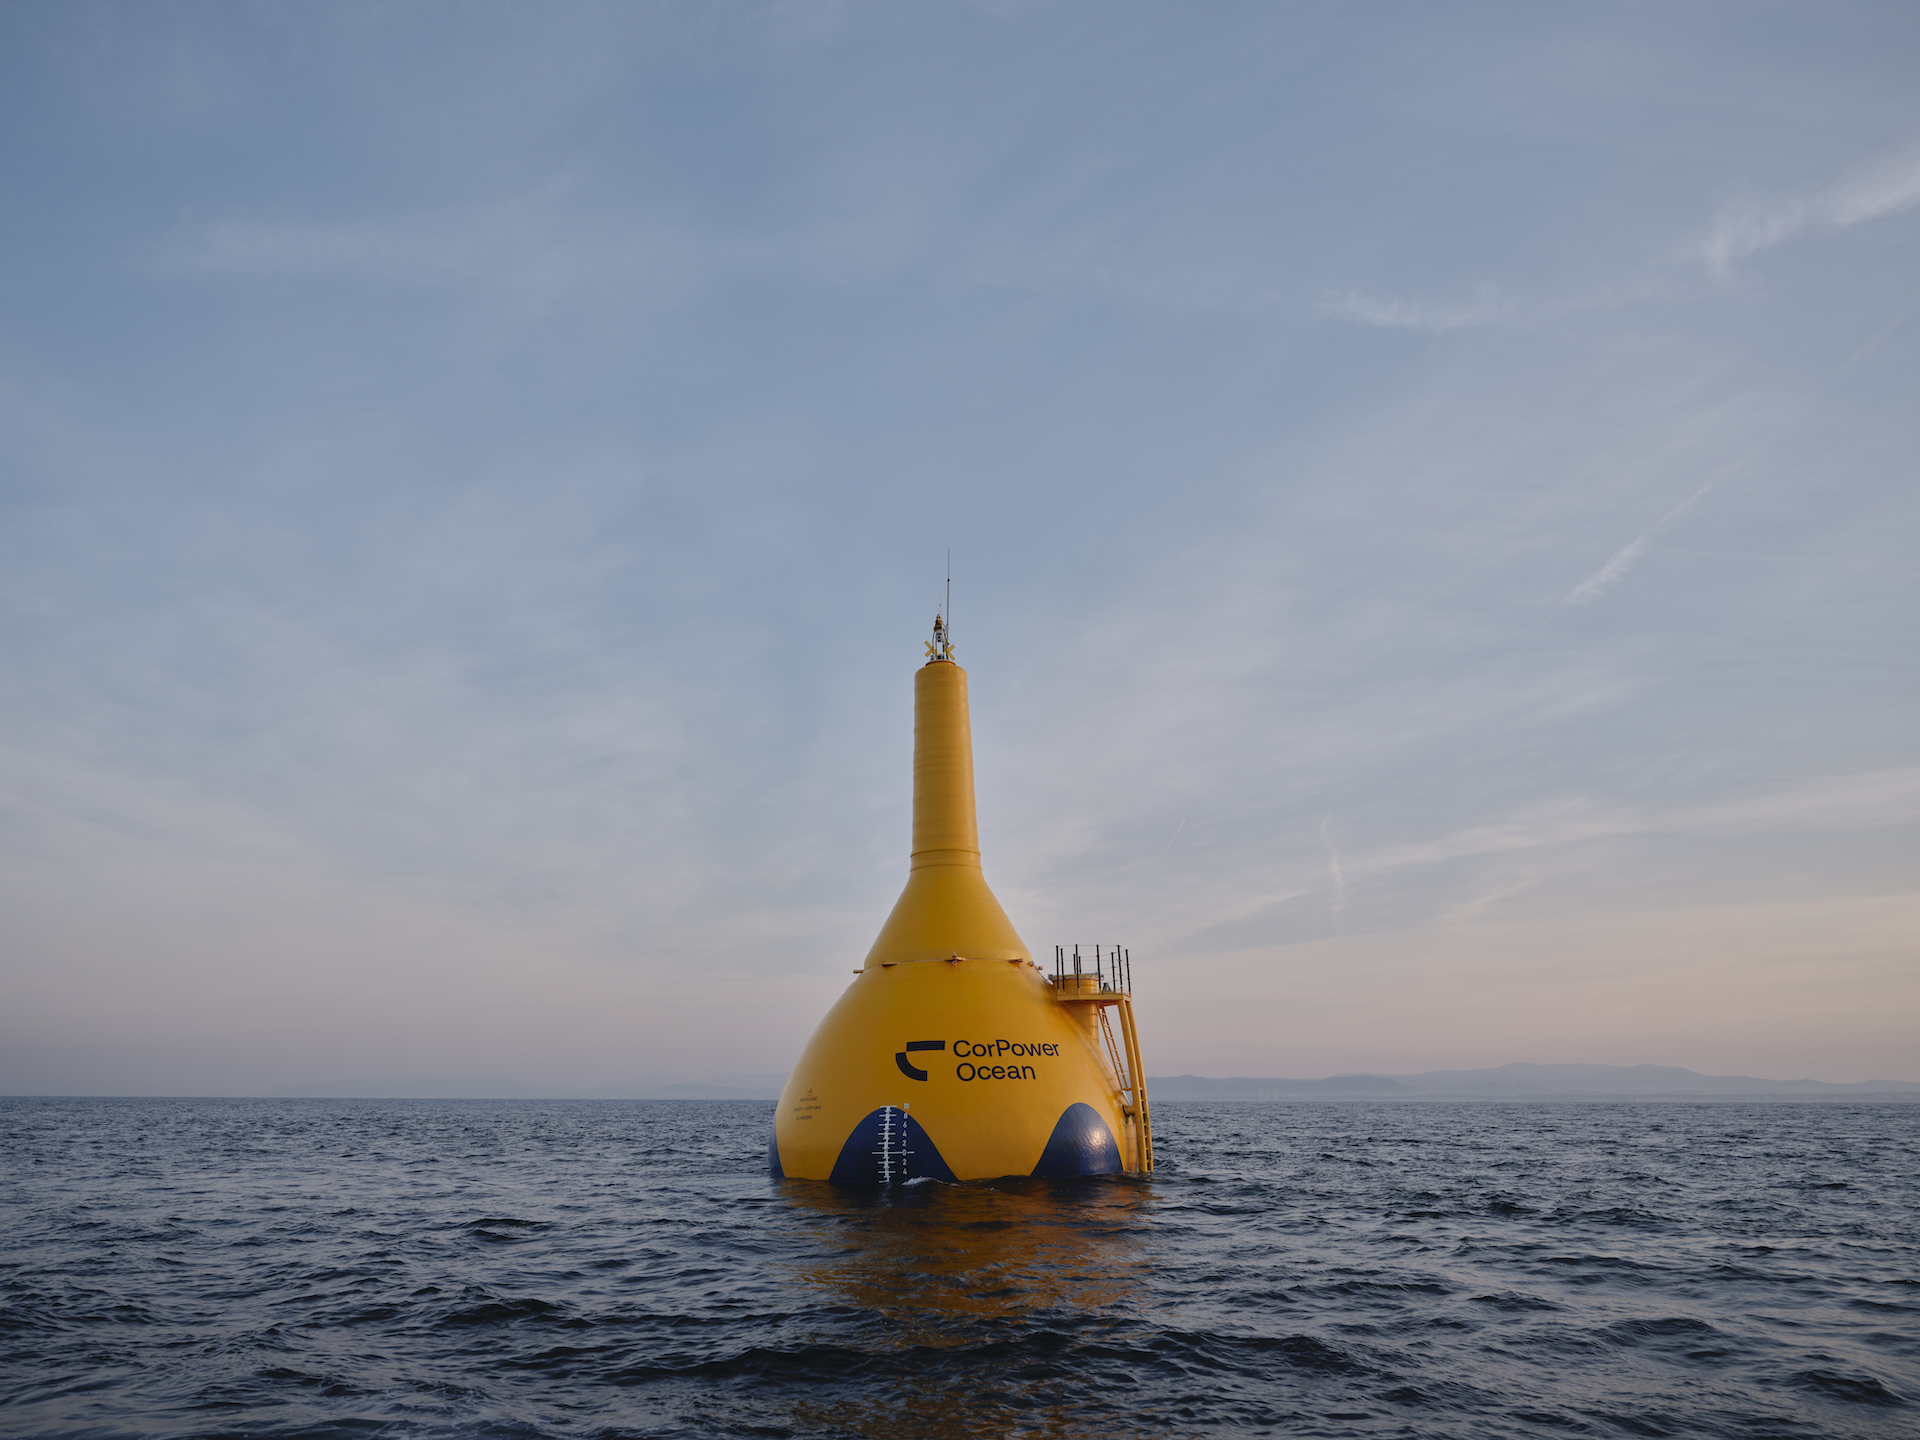 After first phase of operations, CorPower Ocean’s wave energy device 'proven at commercial scale'